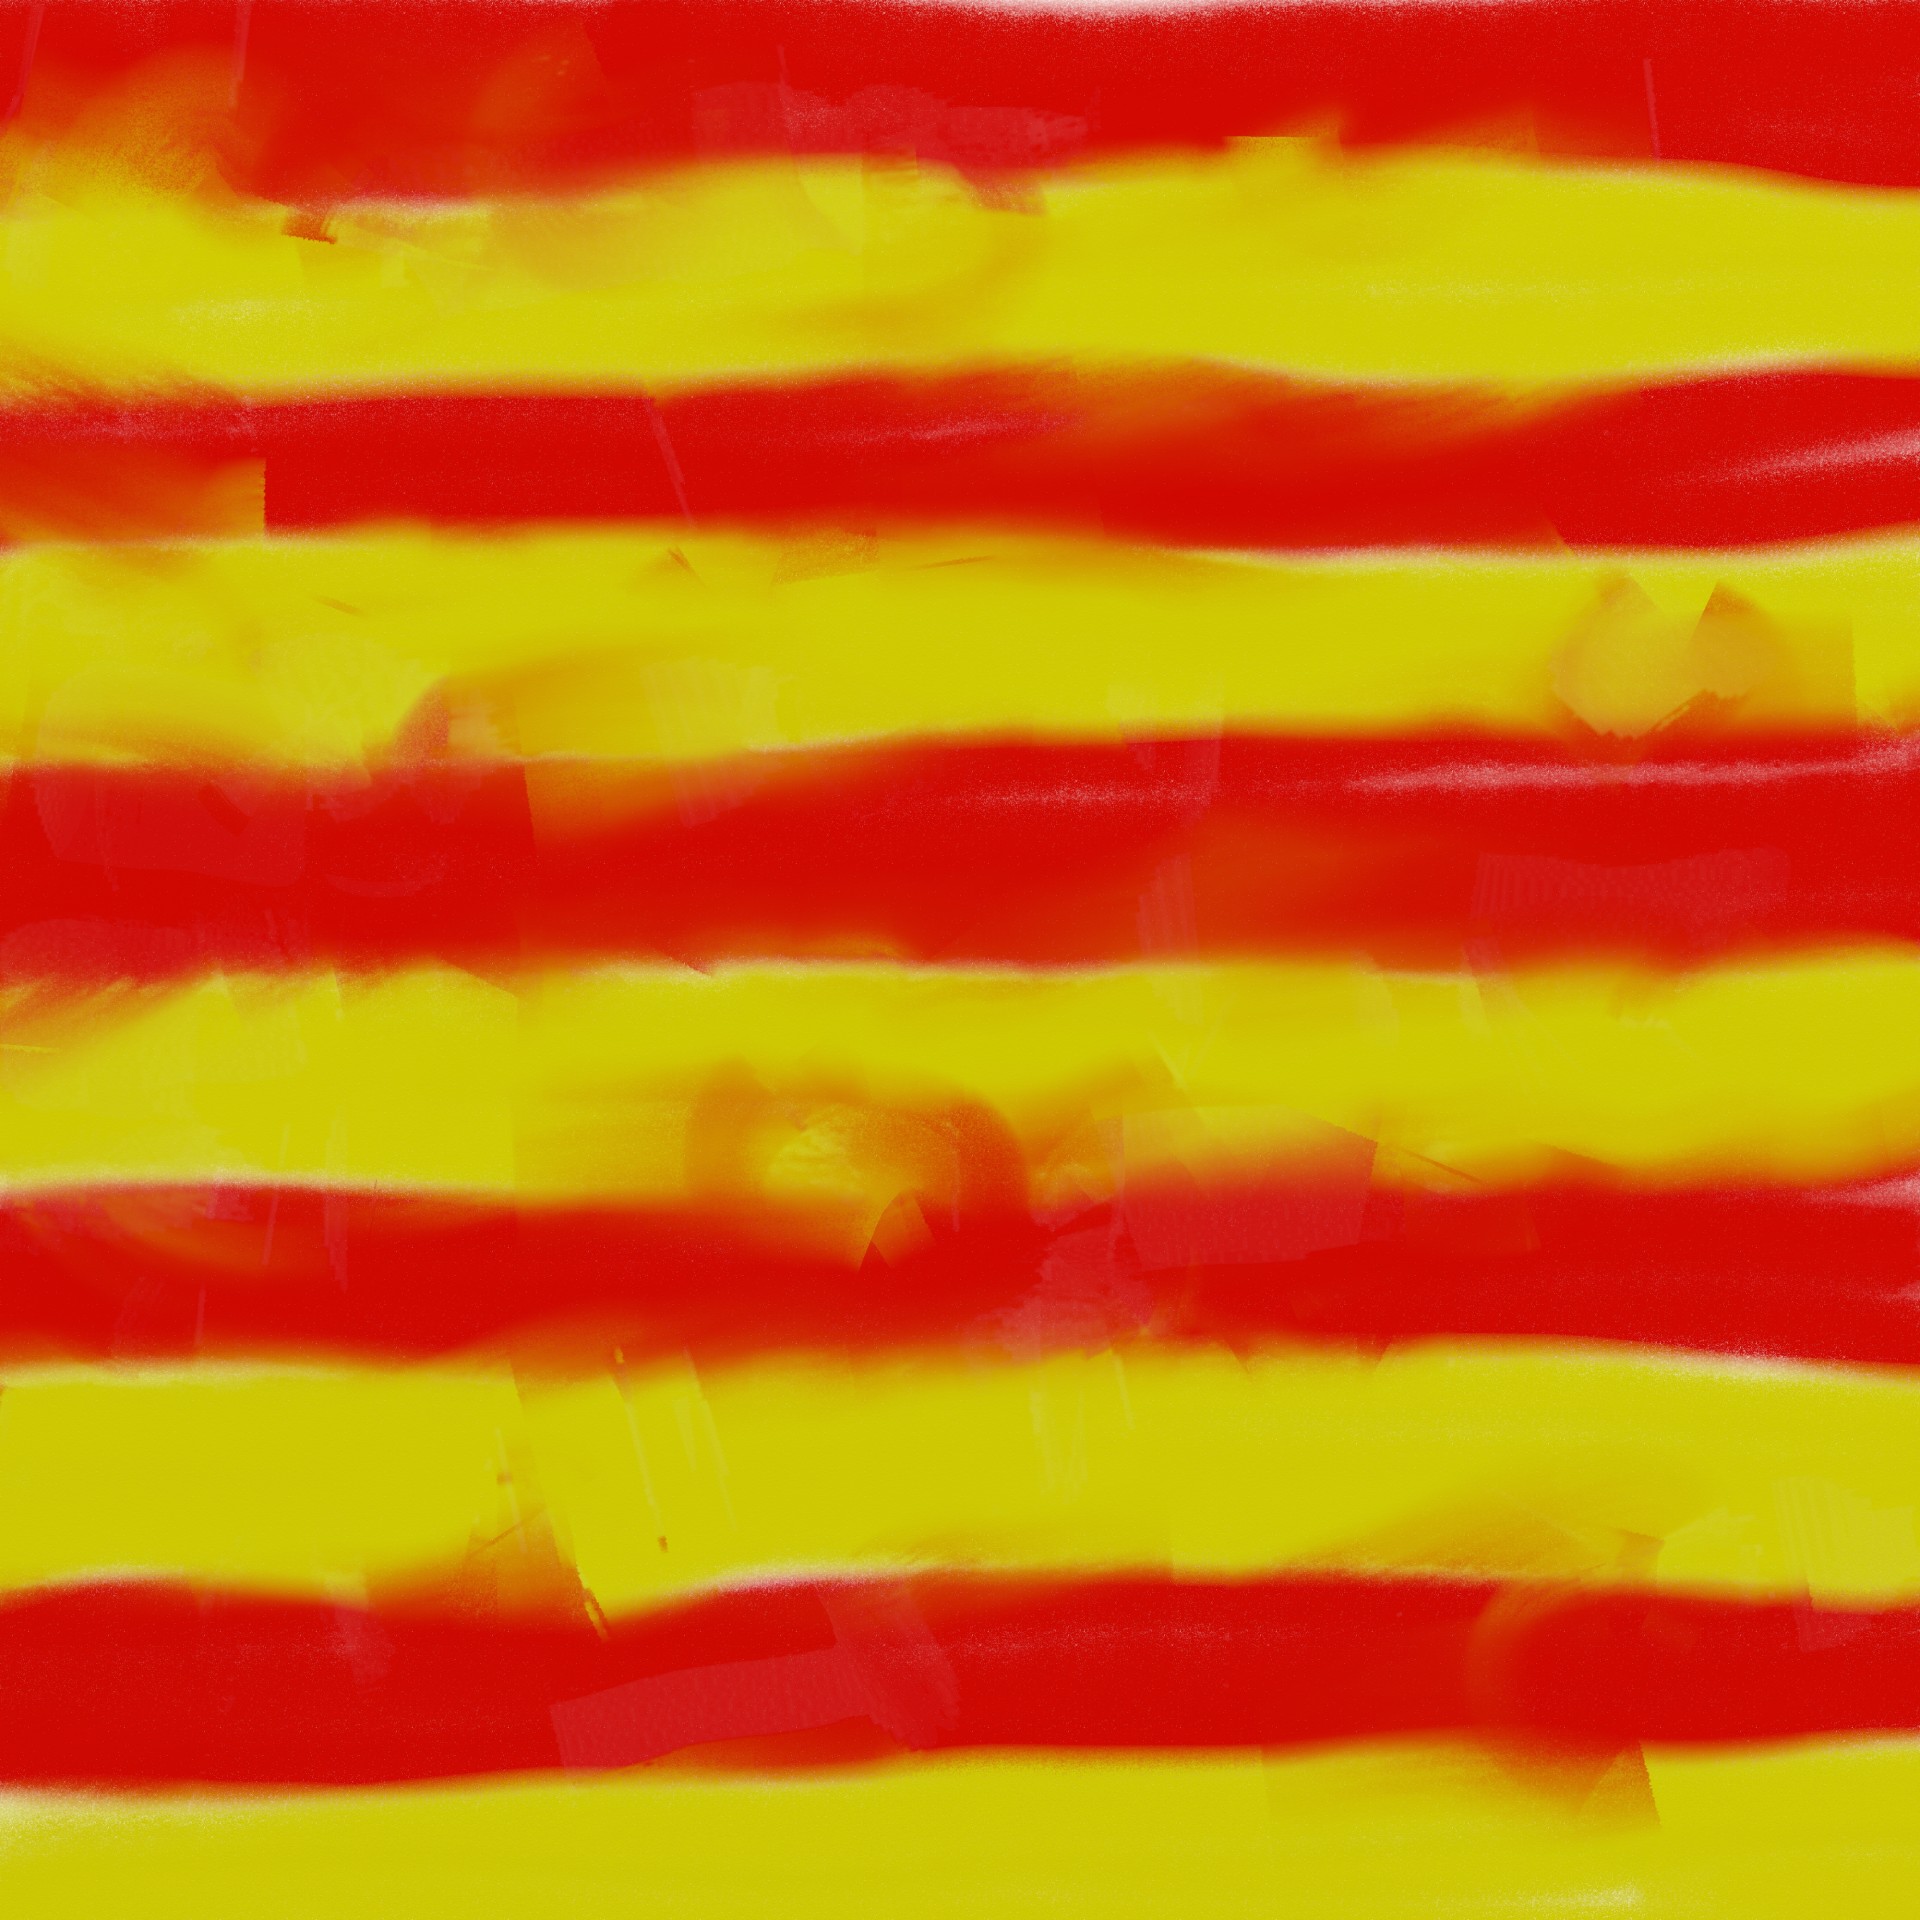 Smudgy Stripes Free Stock Photo - Public Domain Pictures